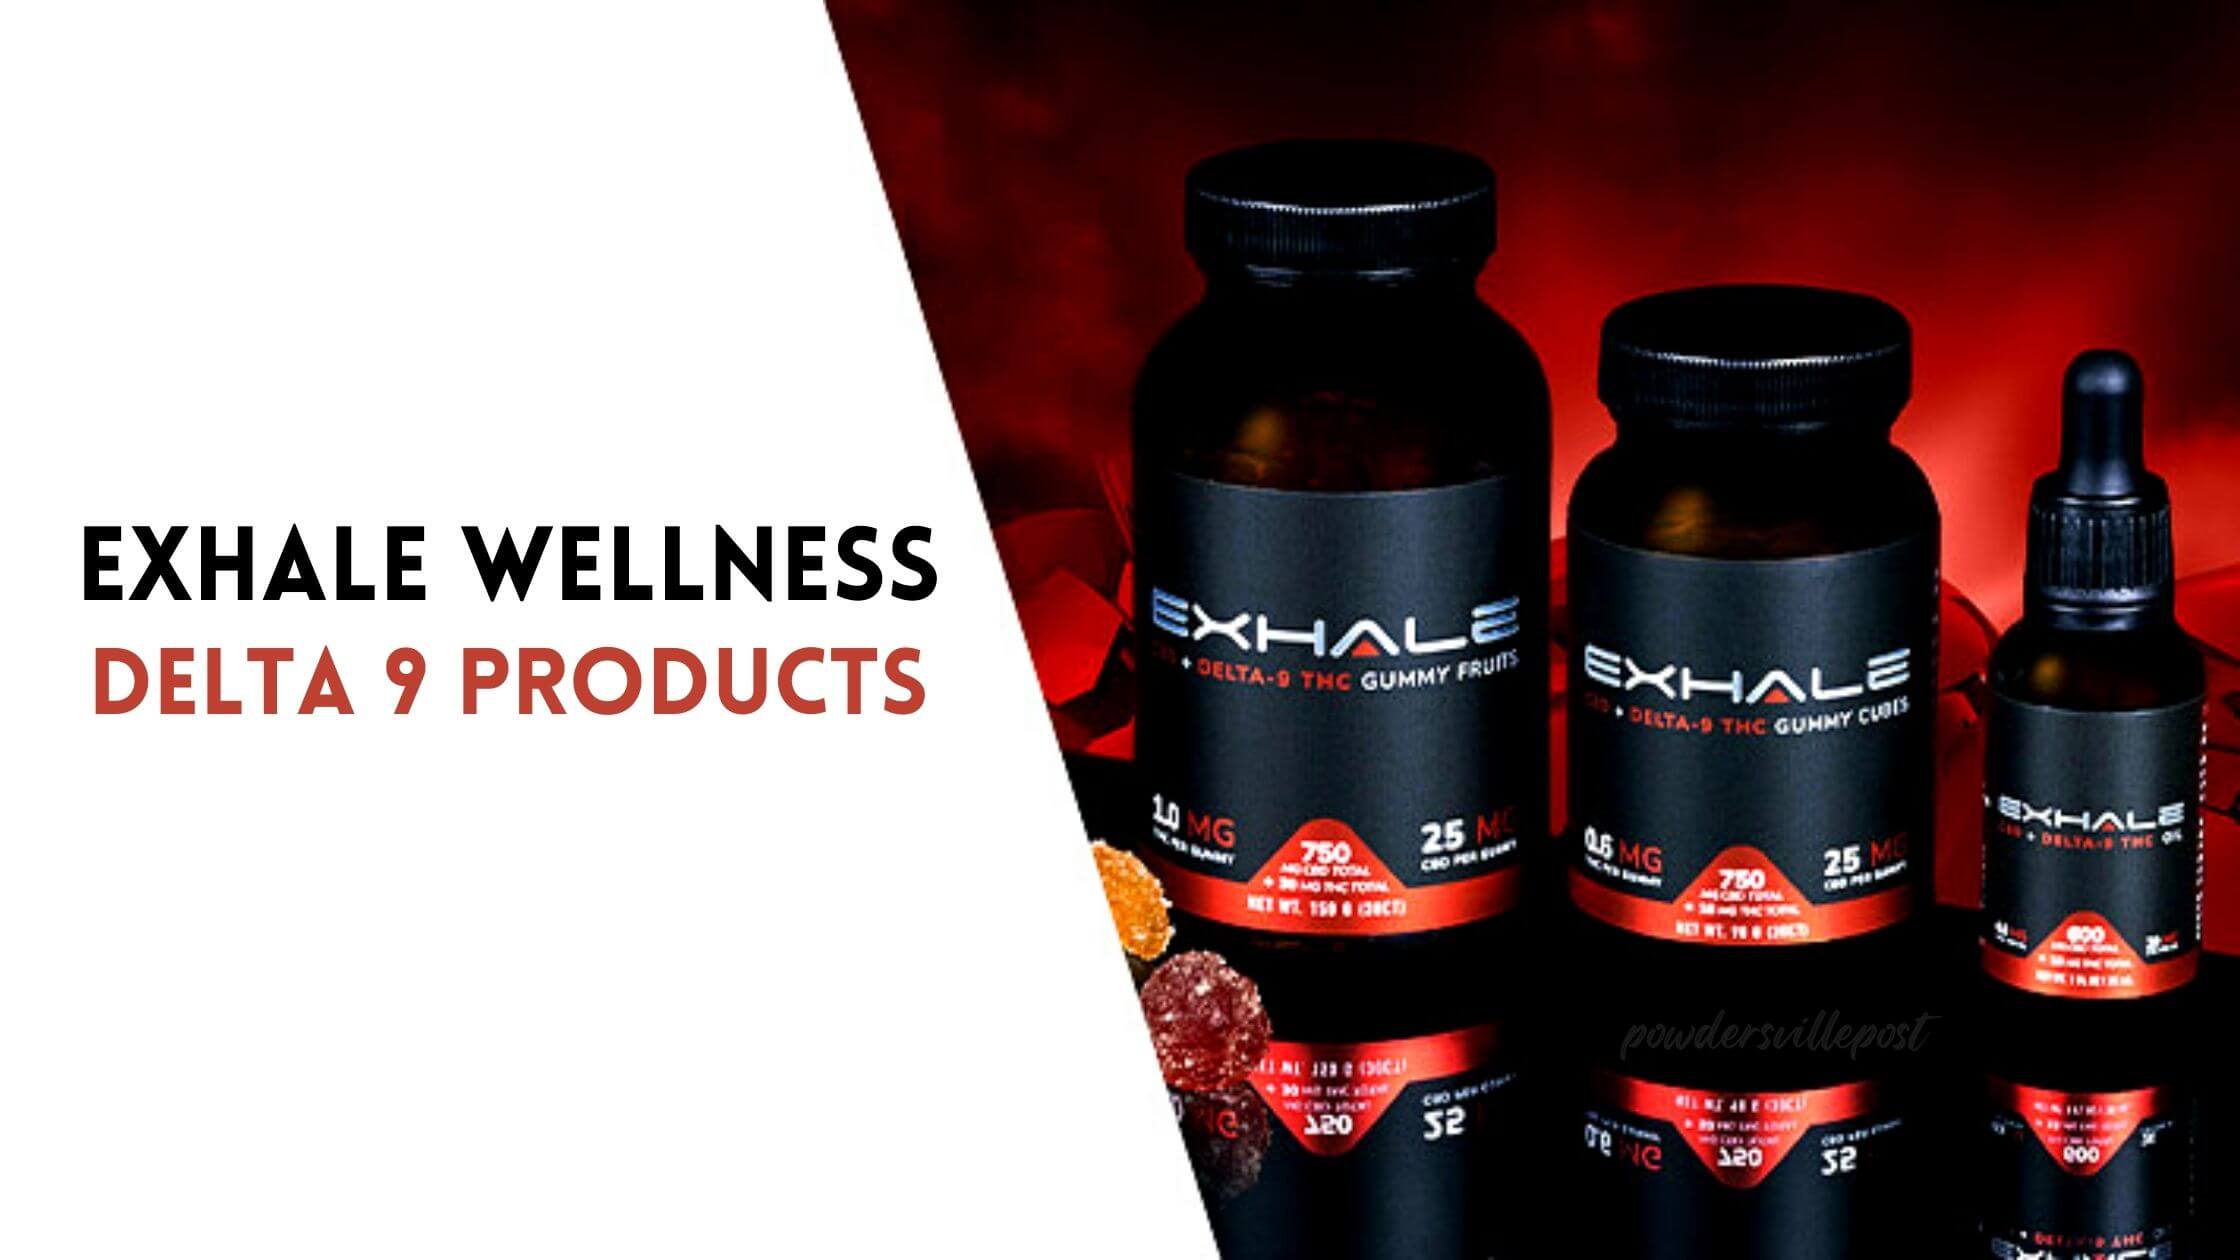 Exhale Wellness Delta 9 Products